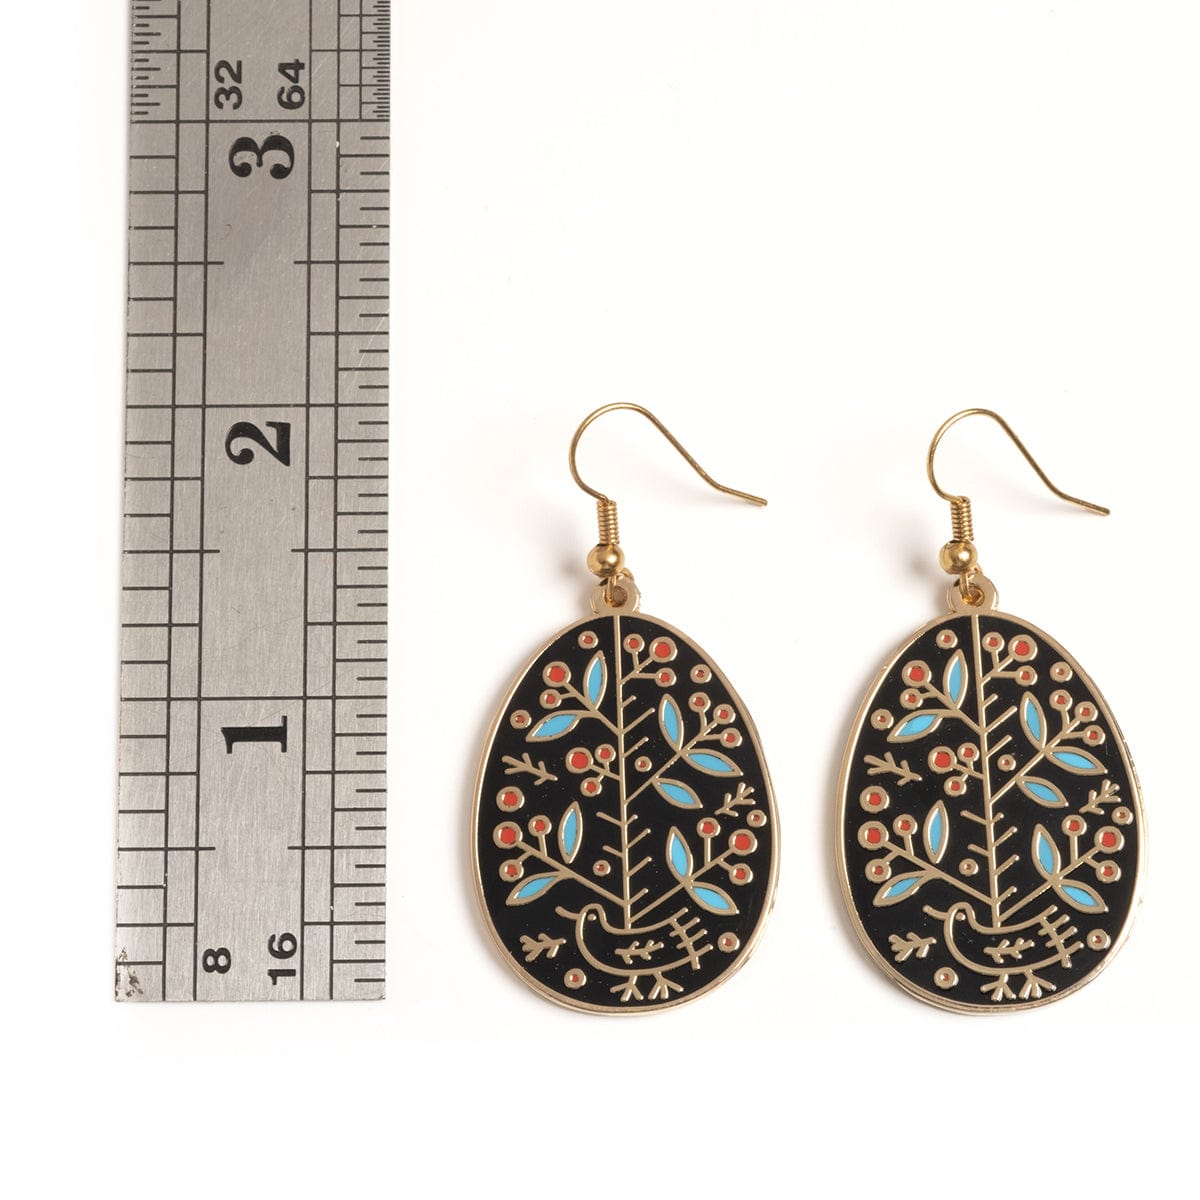 Ukrainian Easter Egg (Pysanky) Earring and Necklace Sets